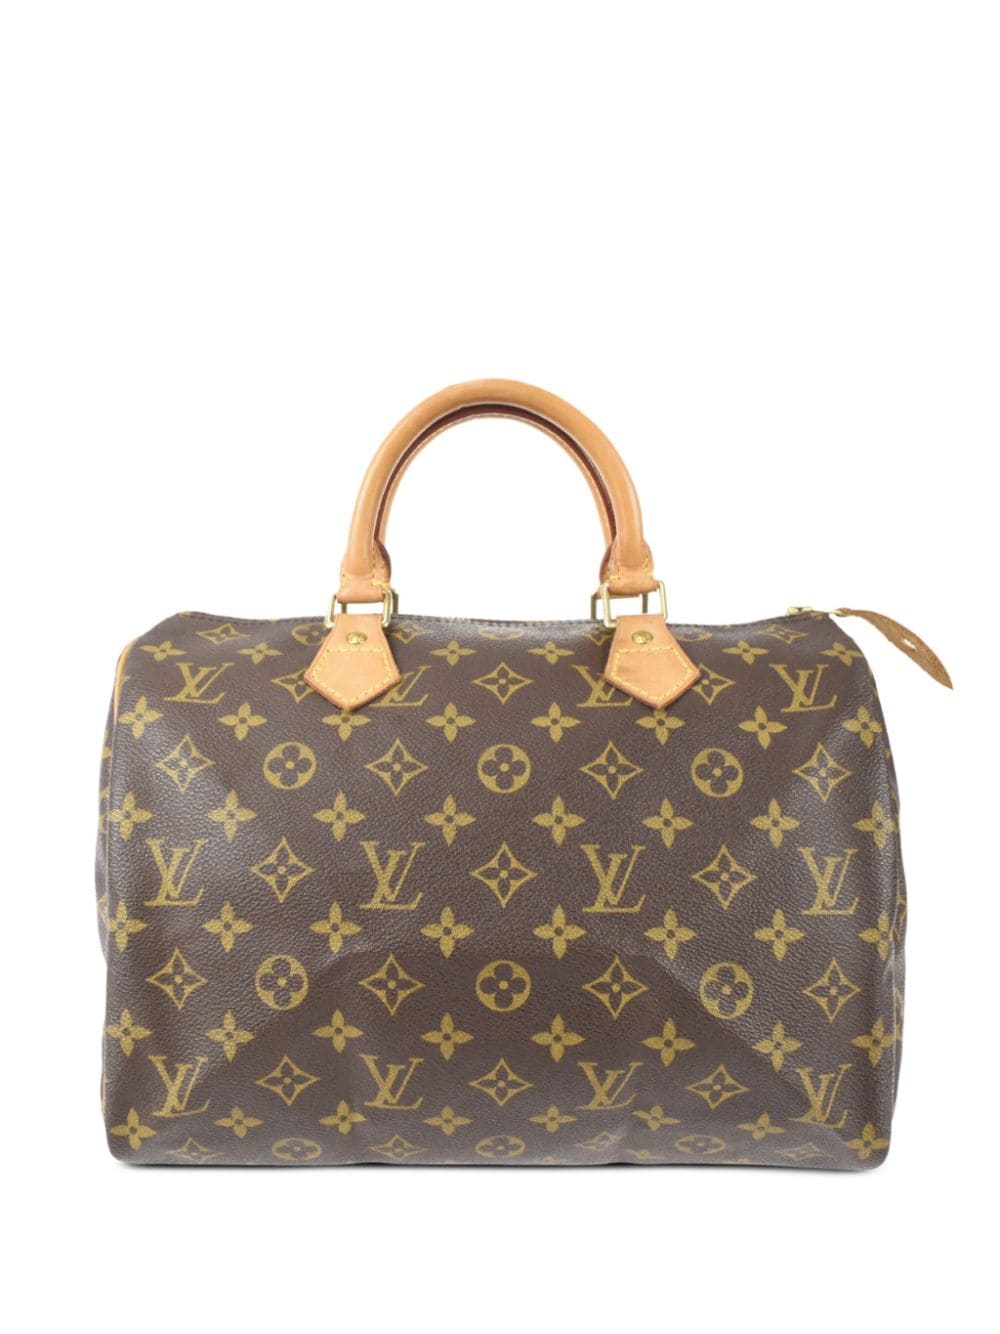 Louis Vuitton Speedy Bandouliere Gold Plate Hardware Service by